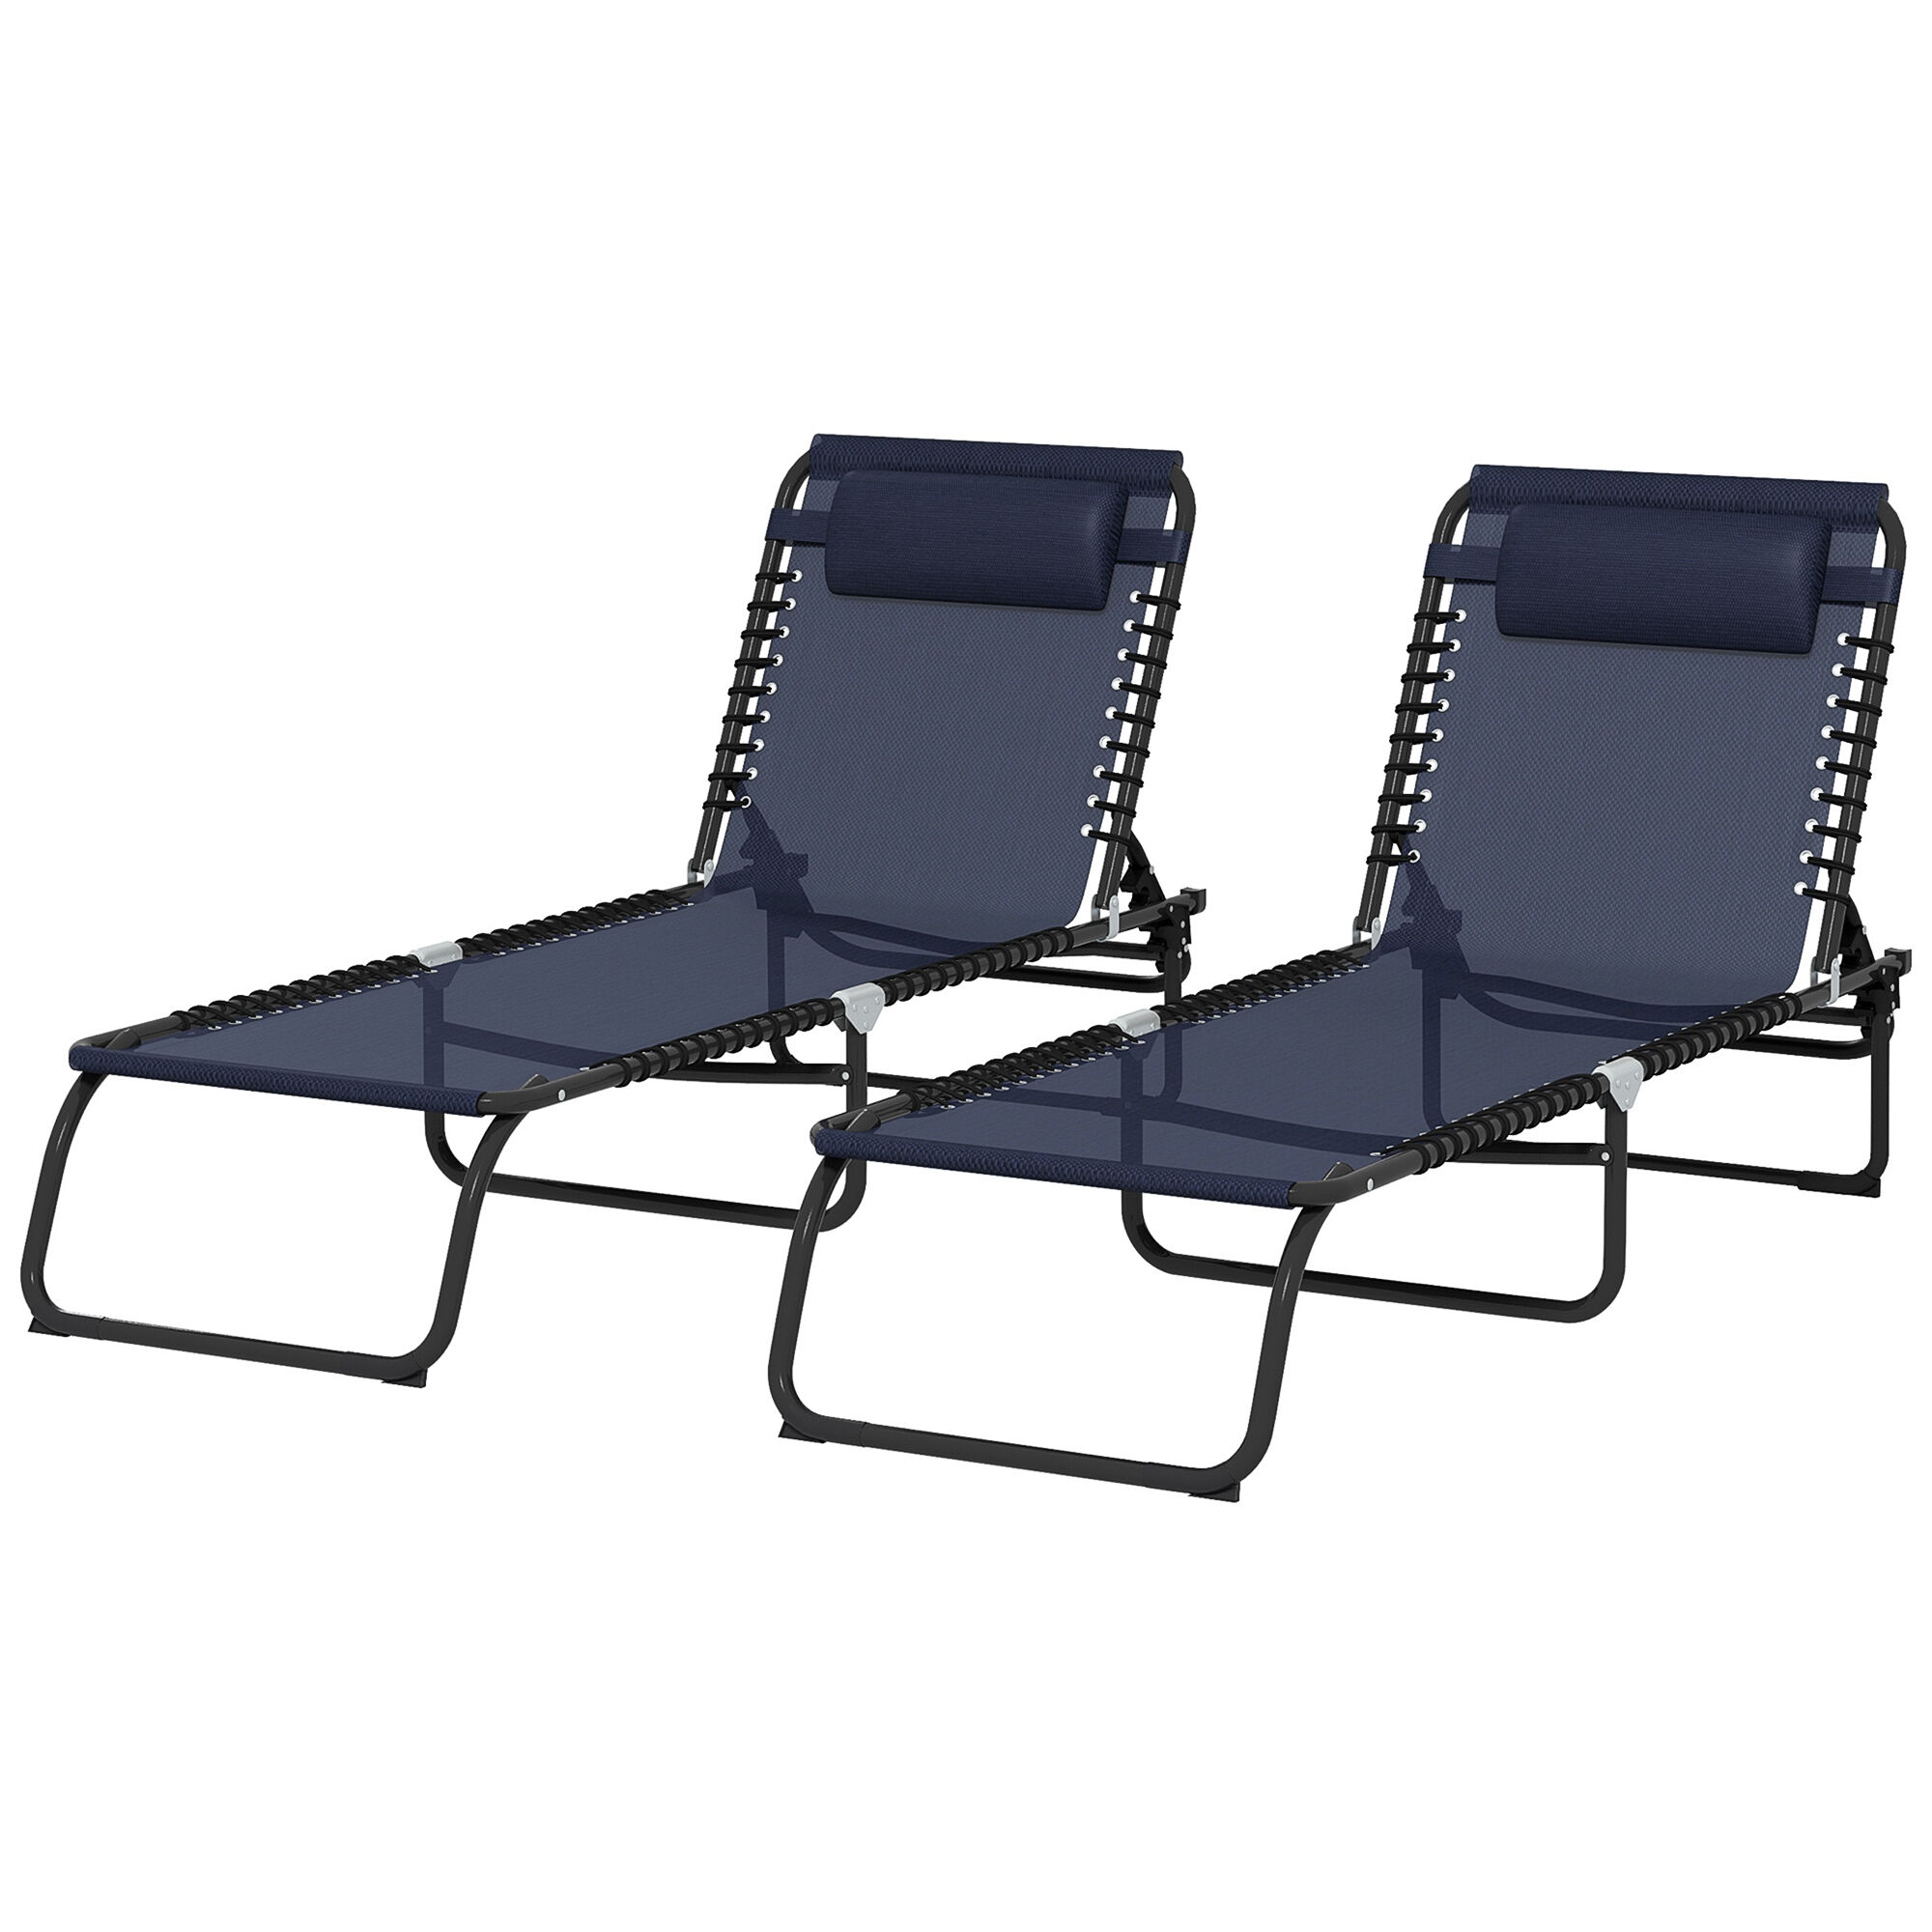 Outsunny 2 Pieces of 4-Position Reclining Beach Chair Chaise Lounge Folding Chair - Dark Blue